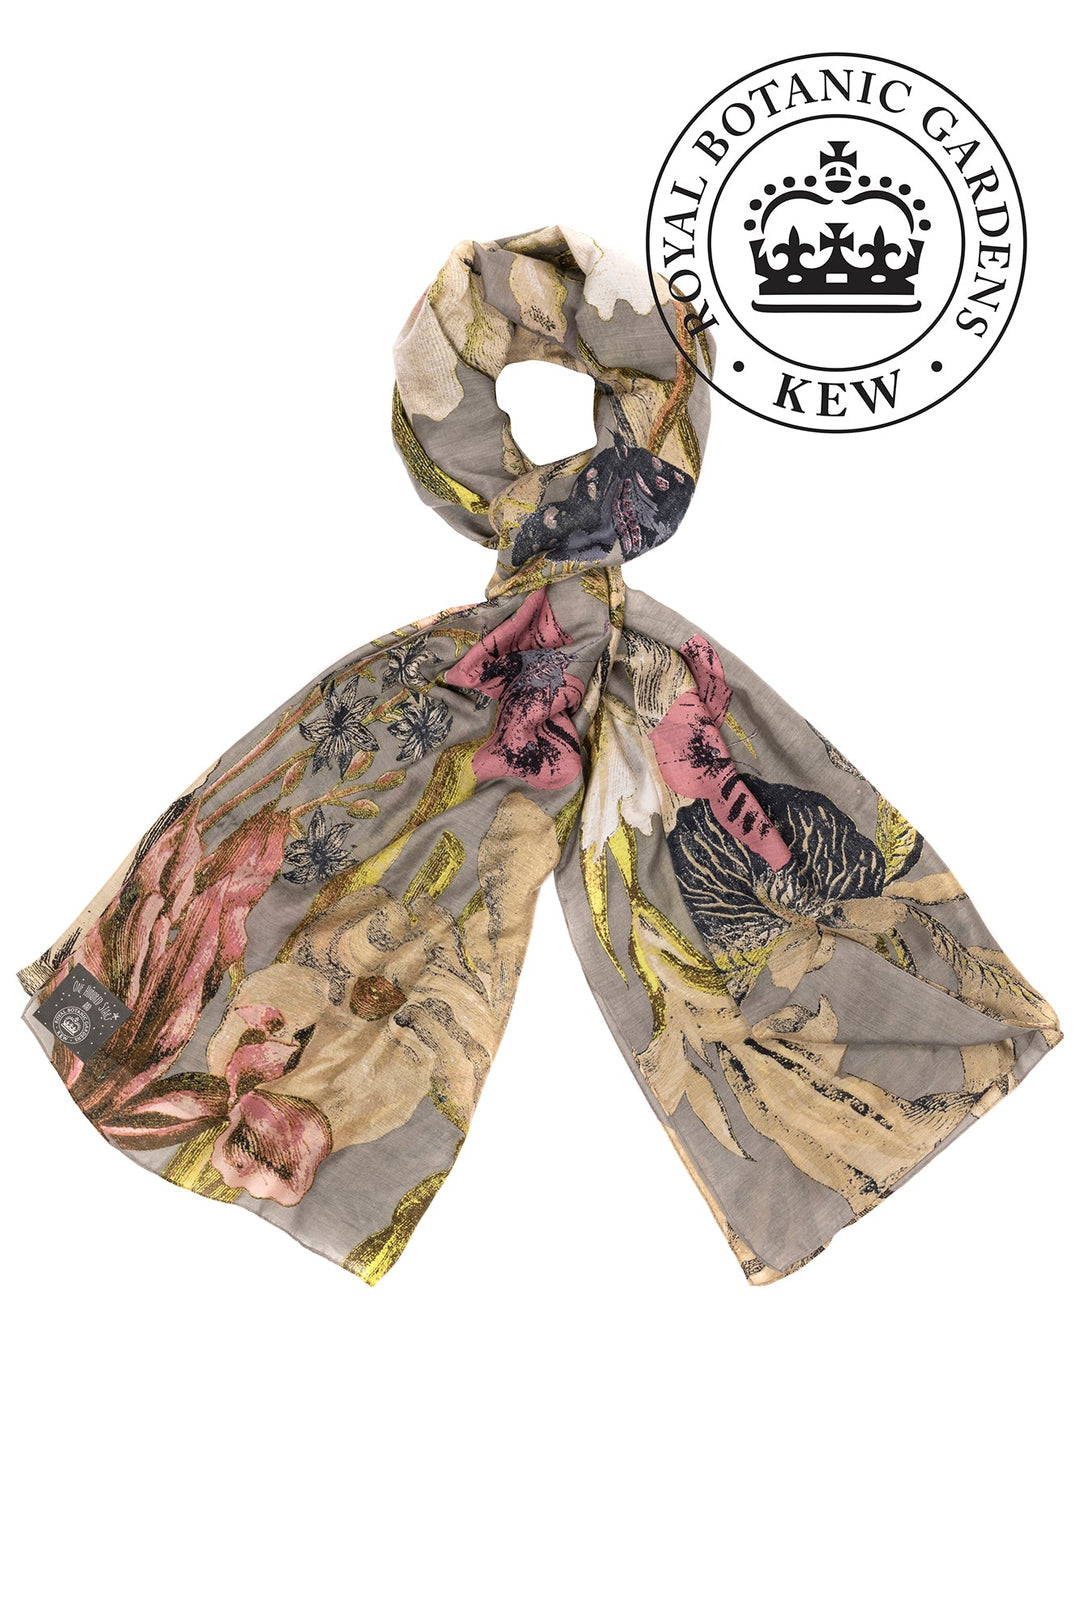 KEW Iris Grey Scarf- Our scarves are a full 100cm x 200cm making them perfect for layering in the winter months or worn as a delicate cover up during the summer seasons.